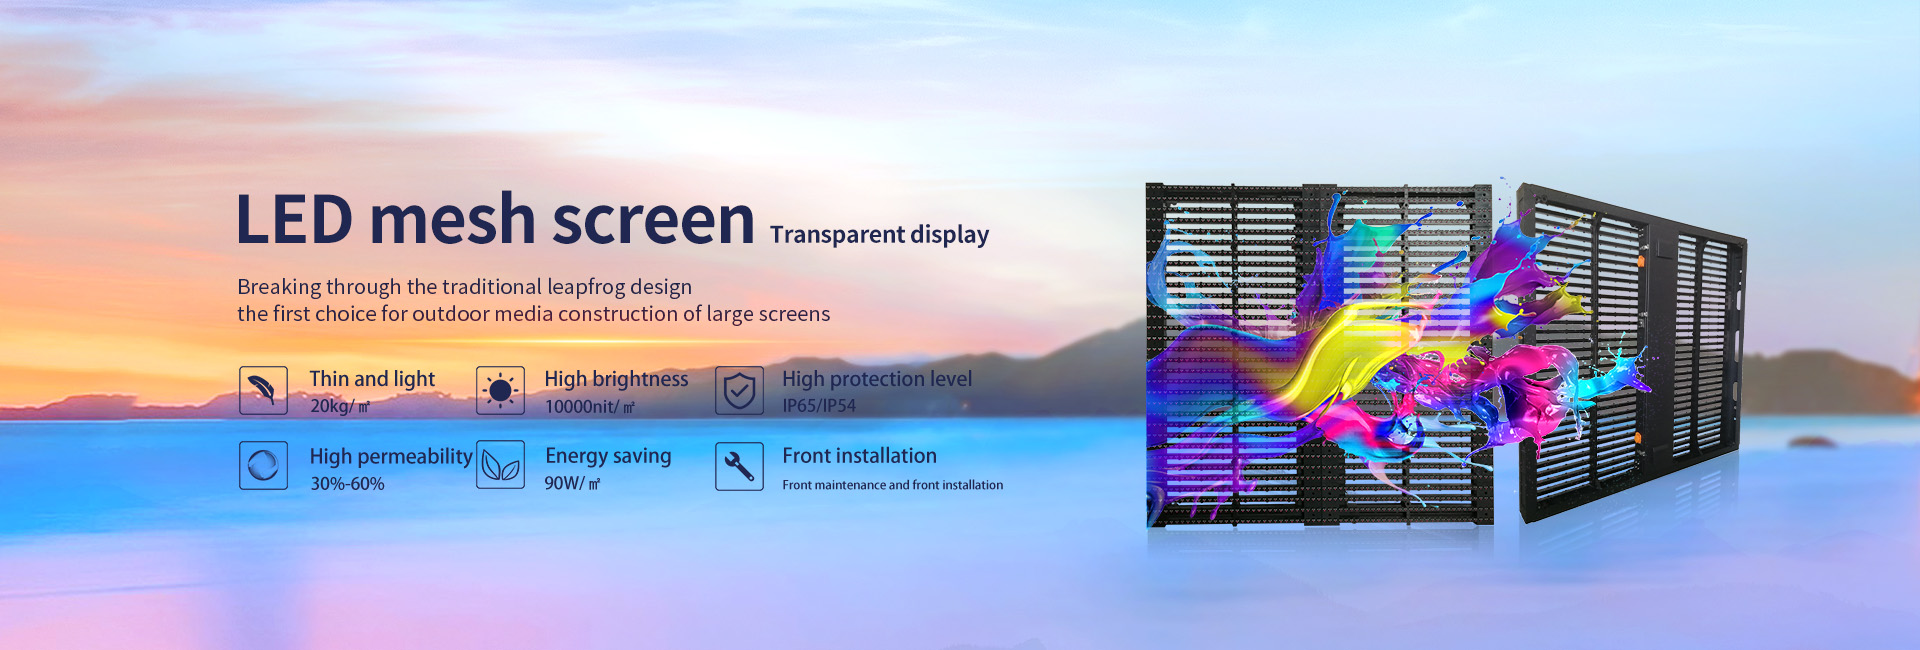 LED outdoor mesh screen